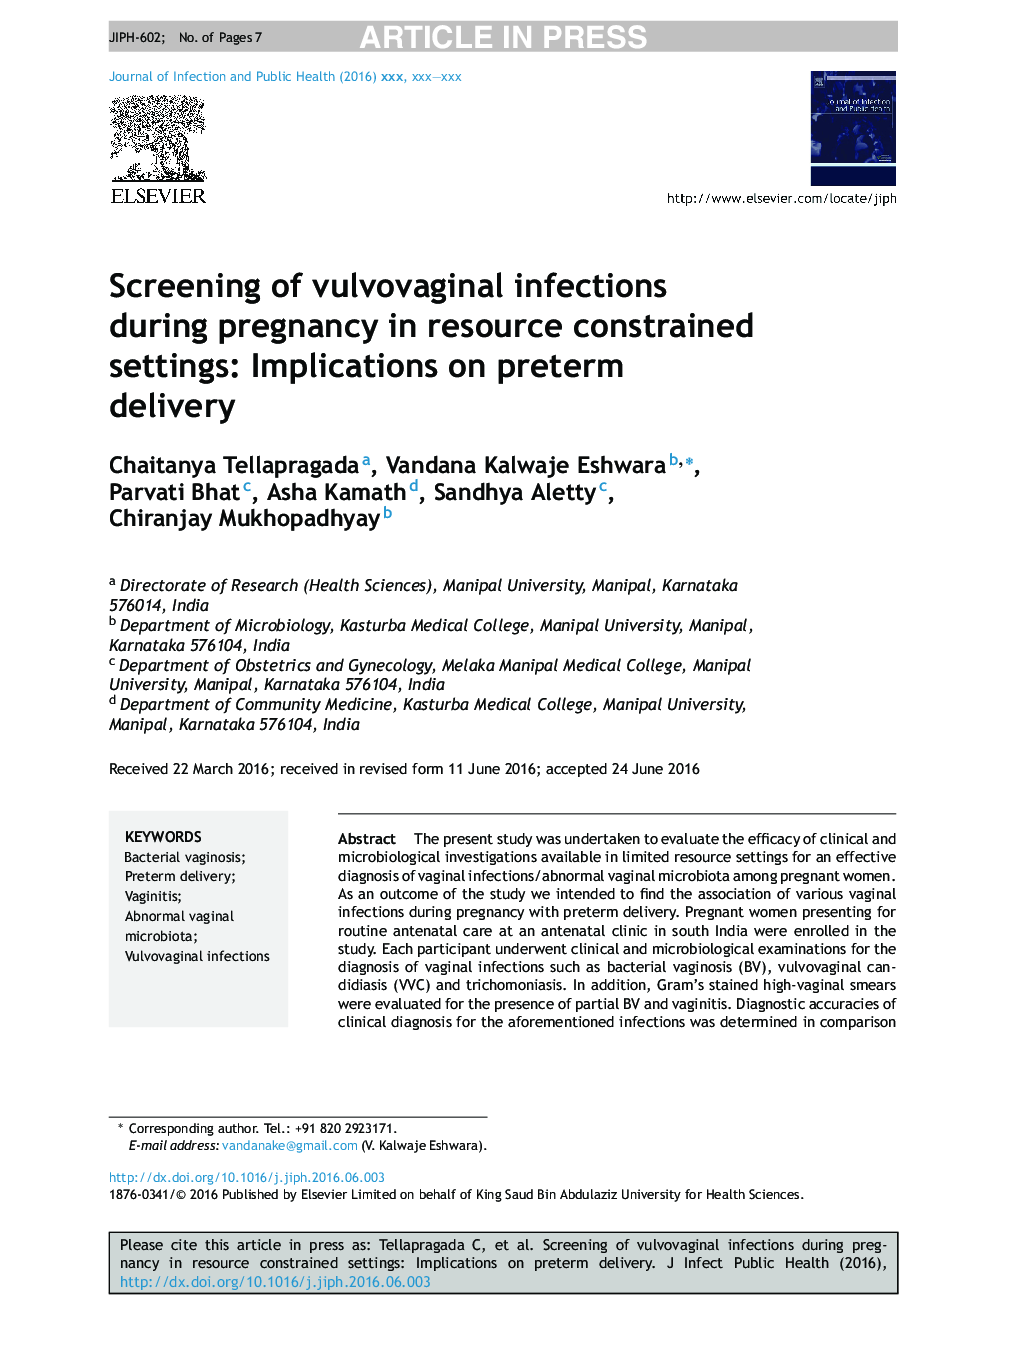 Screening of vulvovaginal infections during pregnancy in resource constrained settings: Implications on preterm delivery